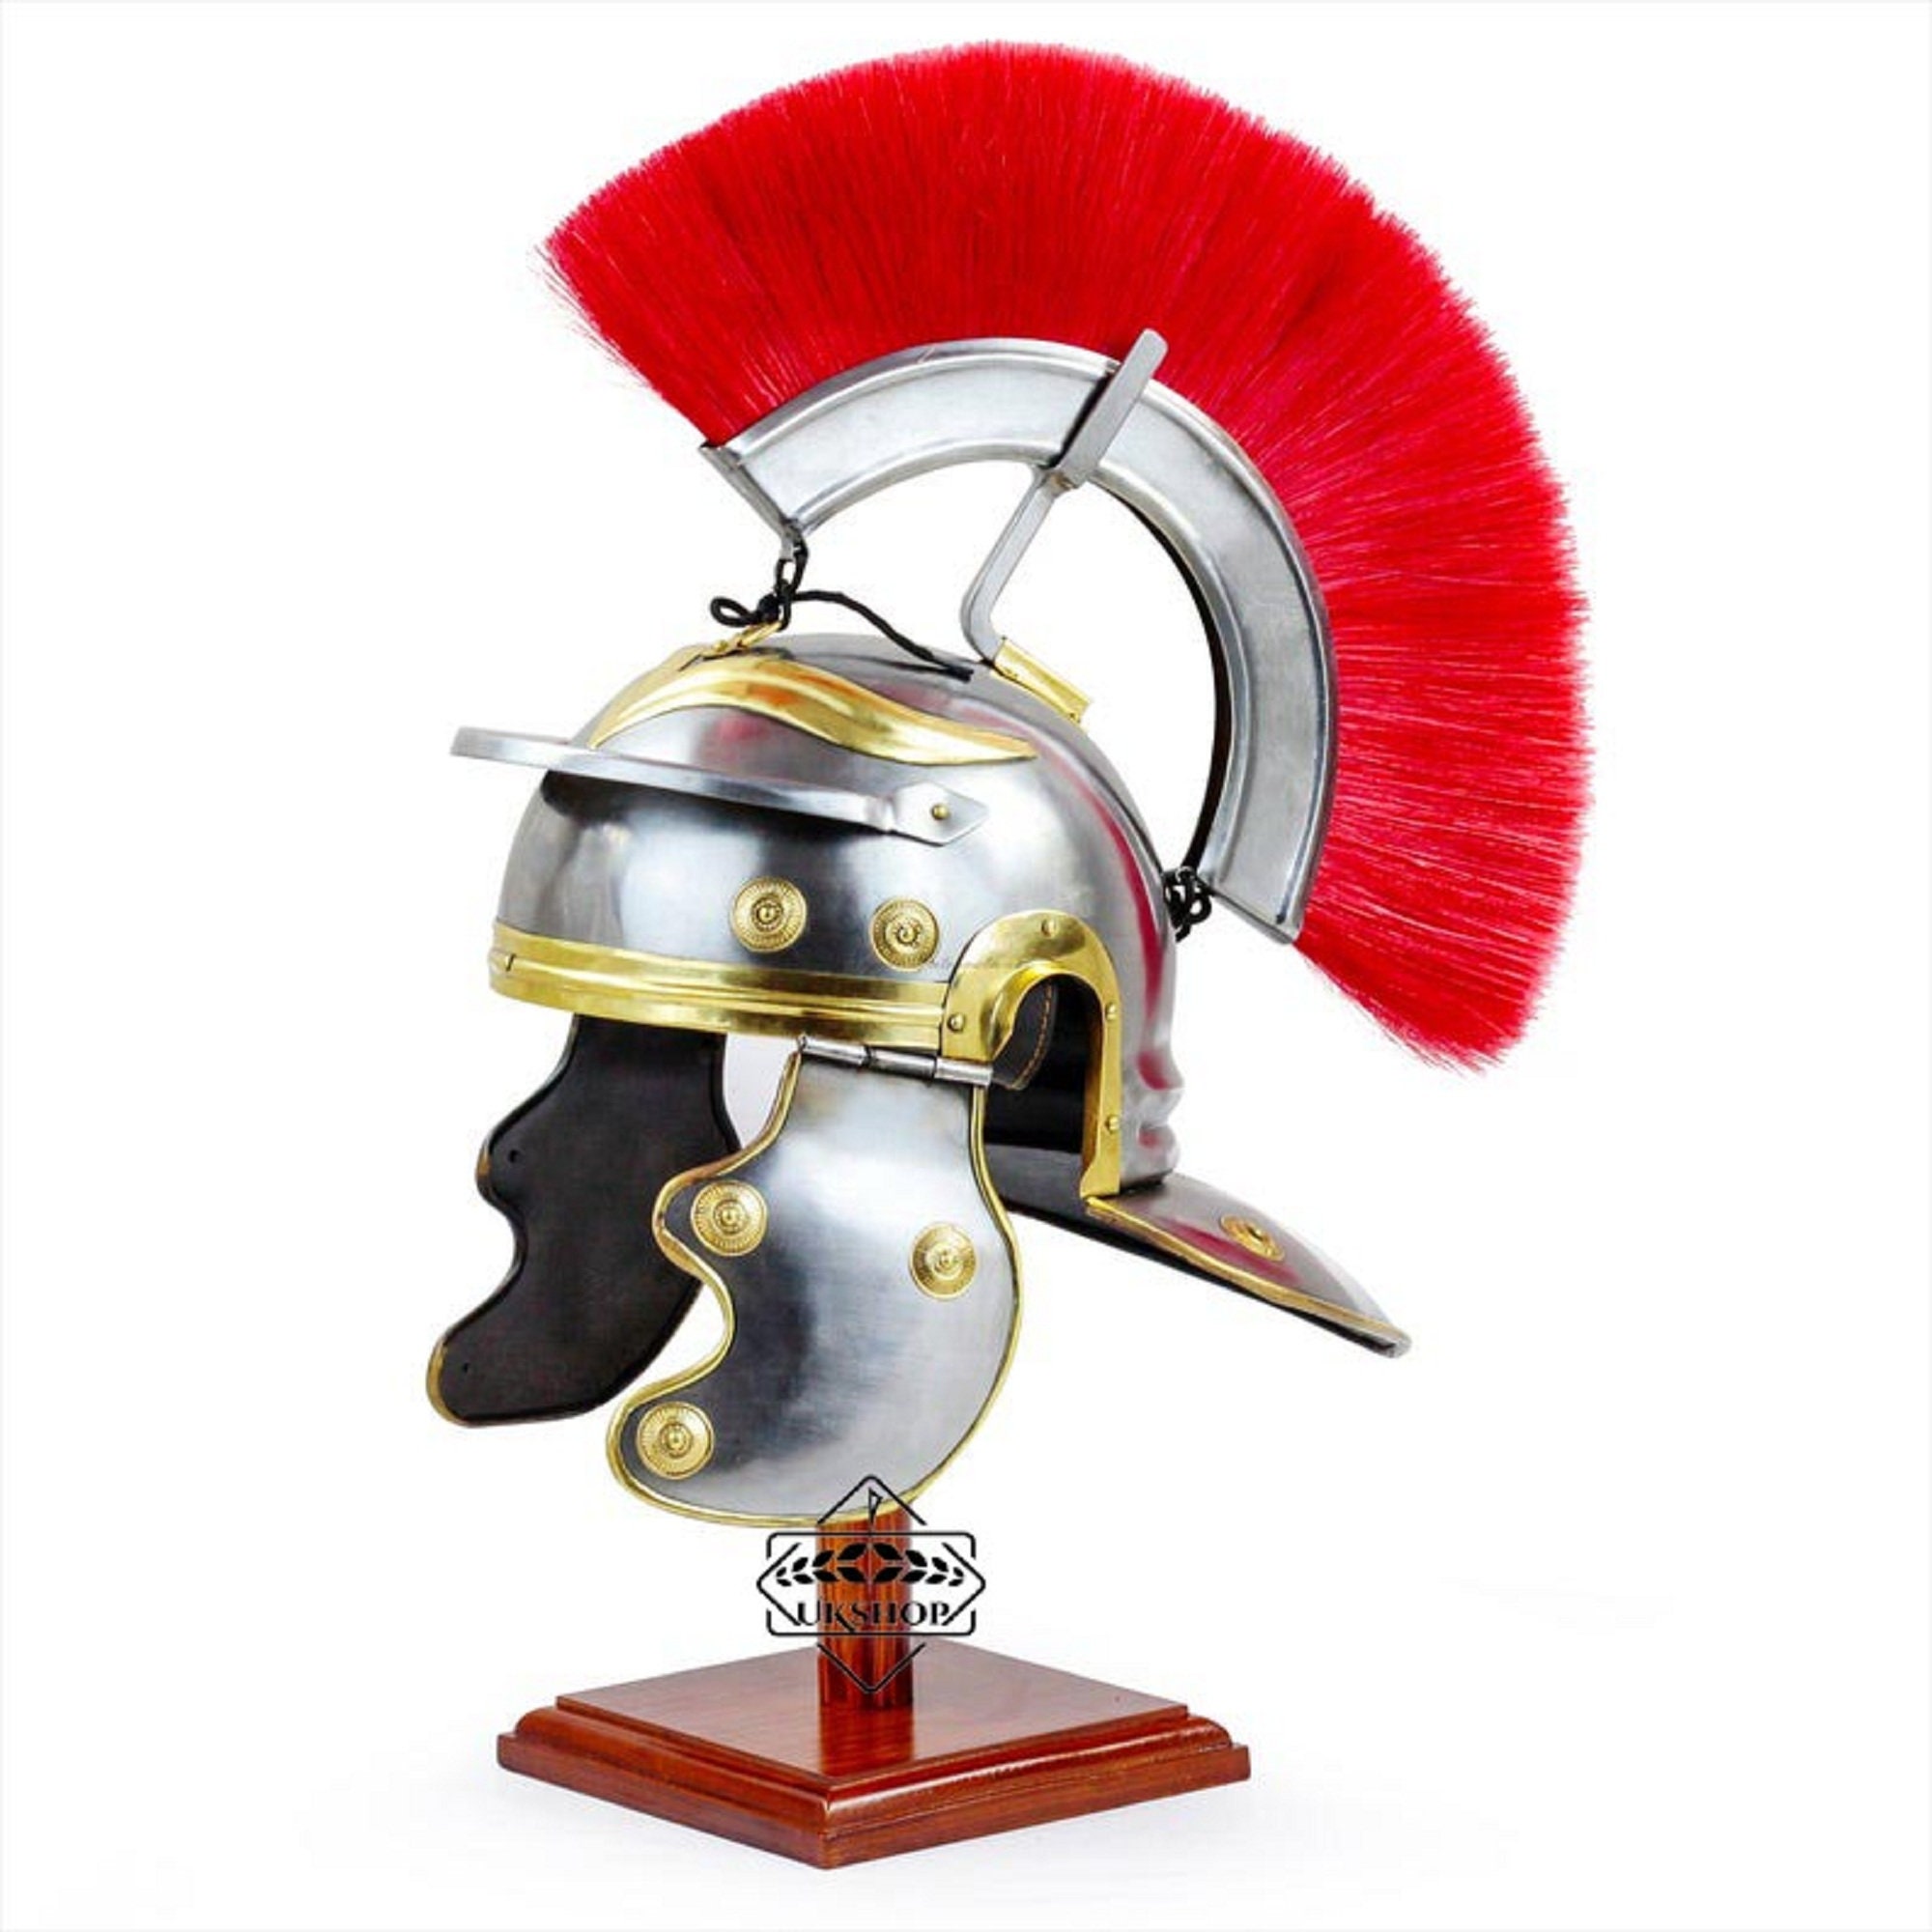 role-play Roman Centurion Helmet with thick red plume re-enactment larp 